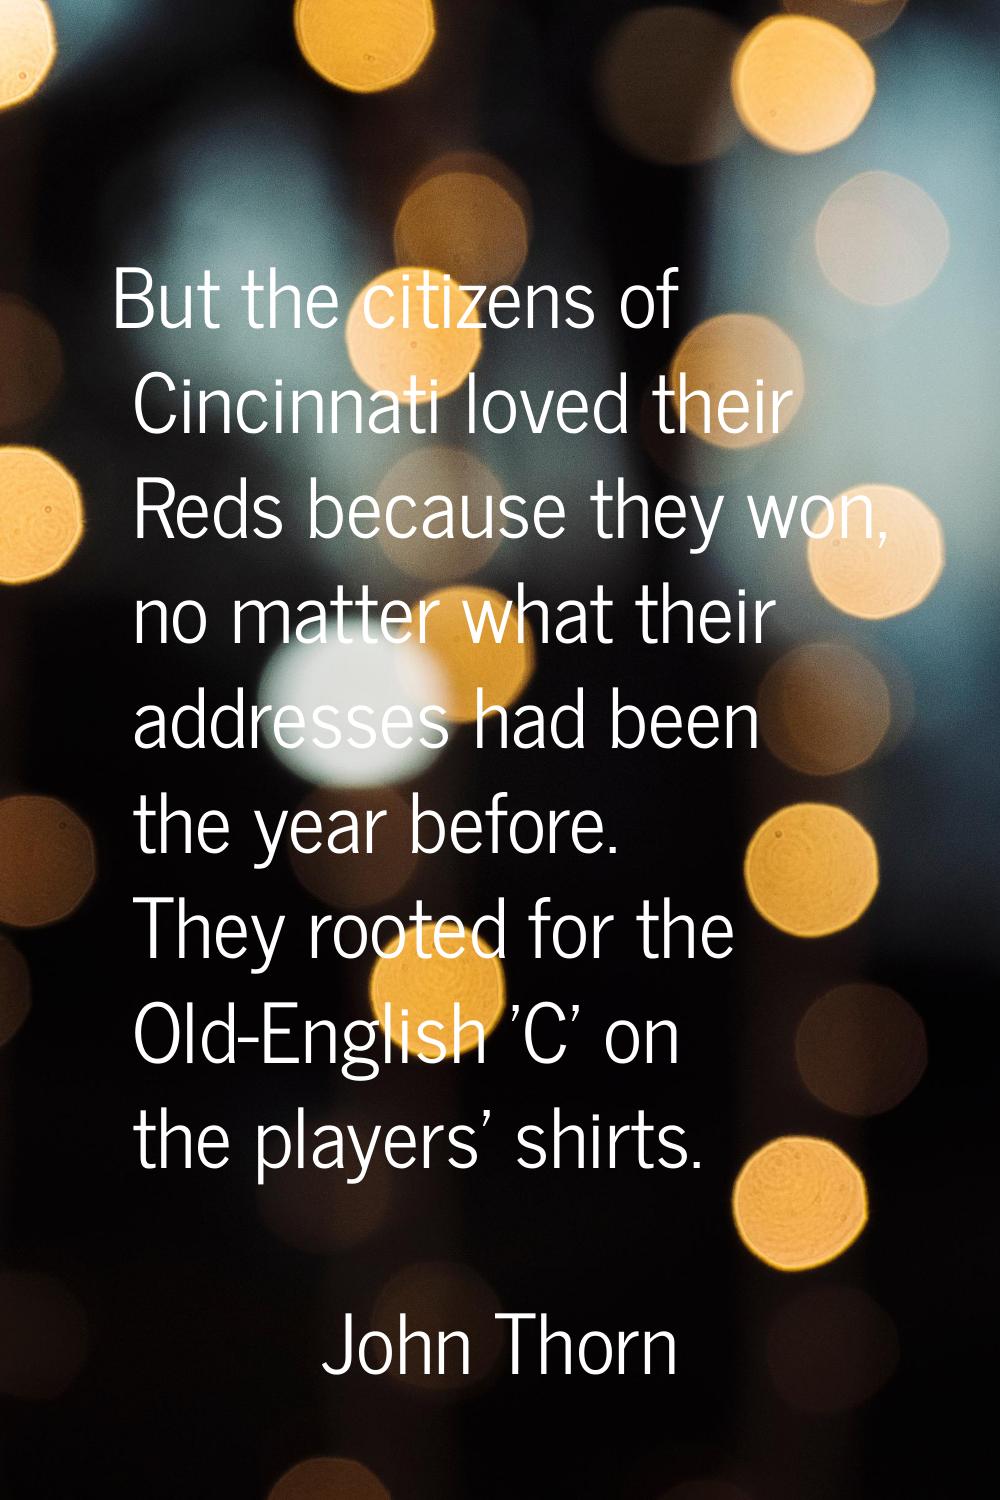 But the citizens of Cincinnati loved their Reds because they won, no matter what their addresses ha